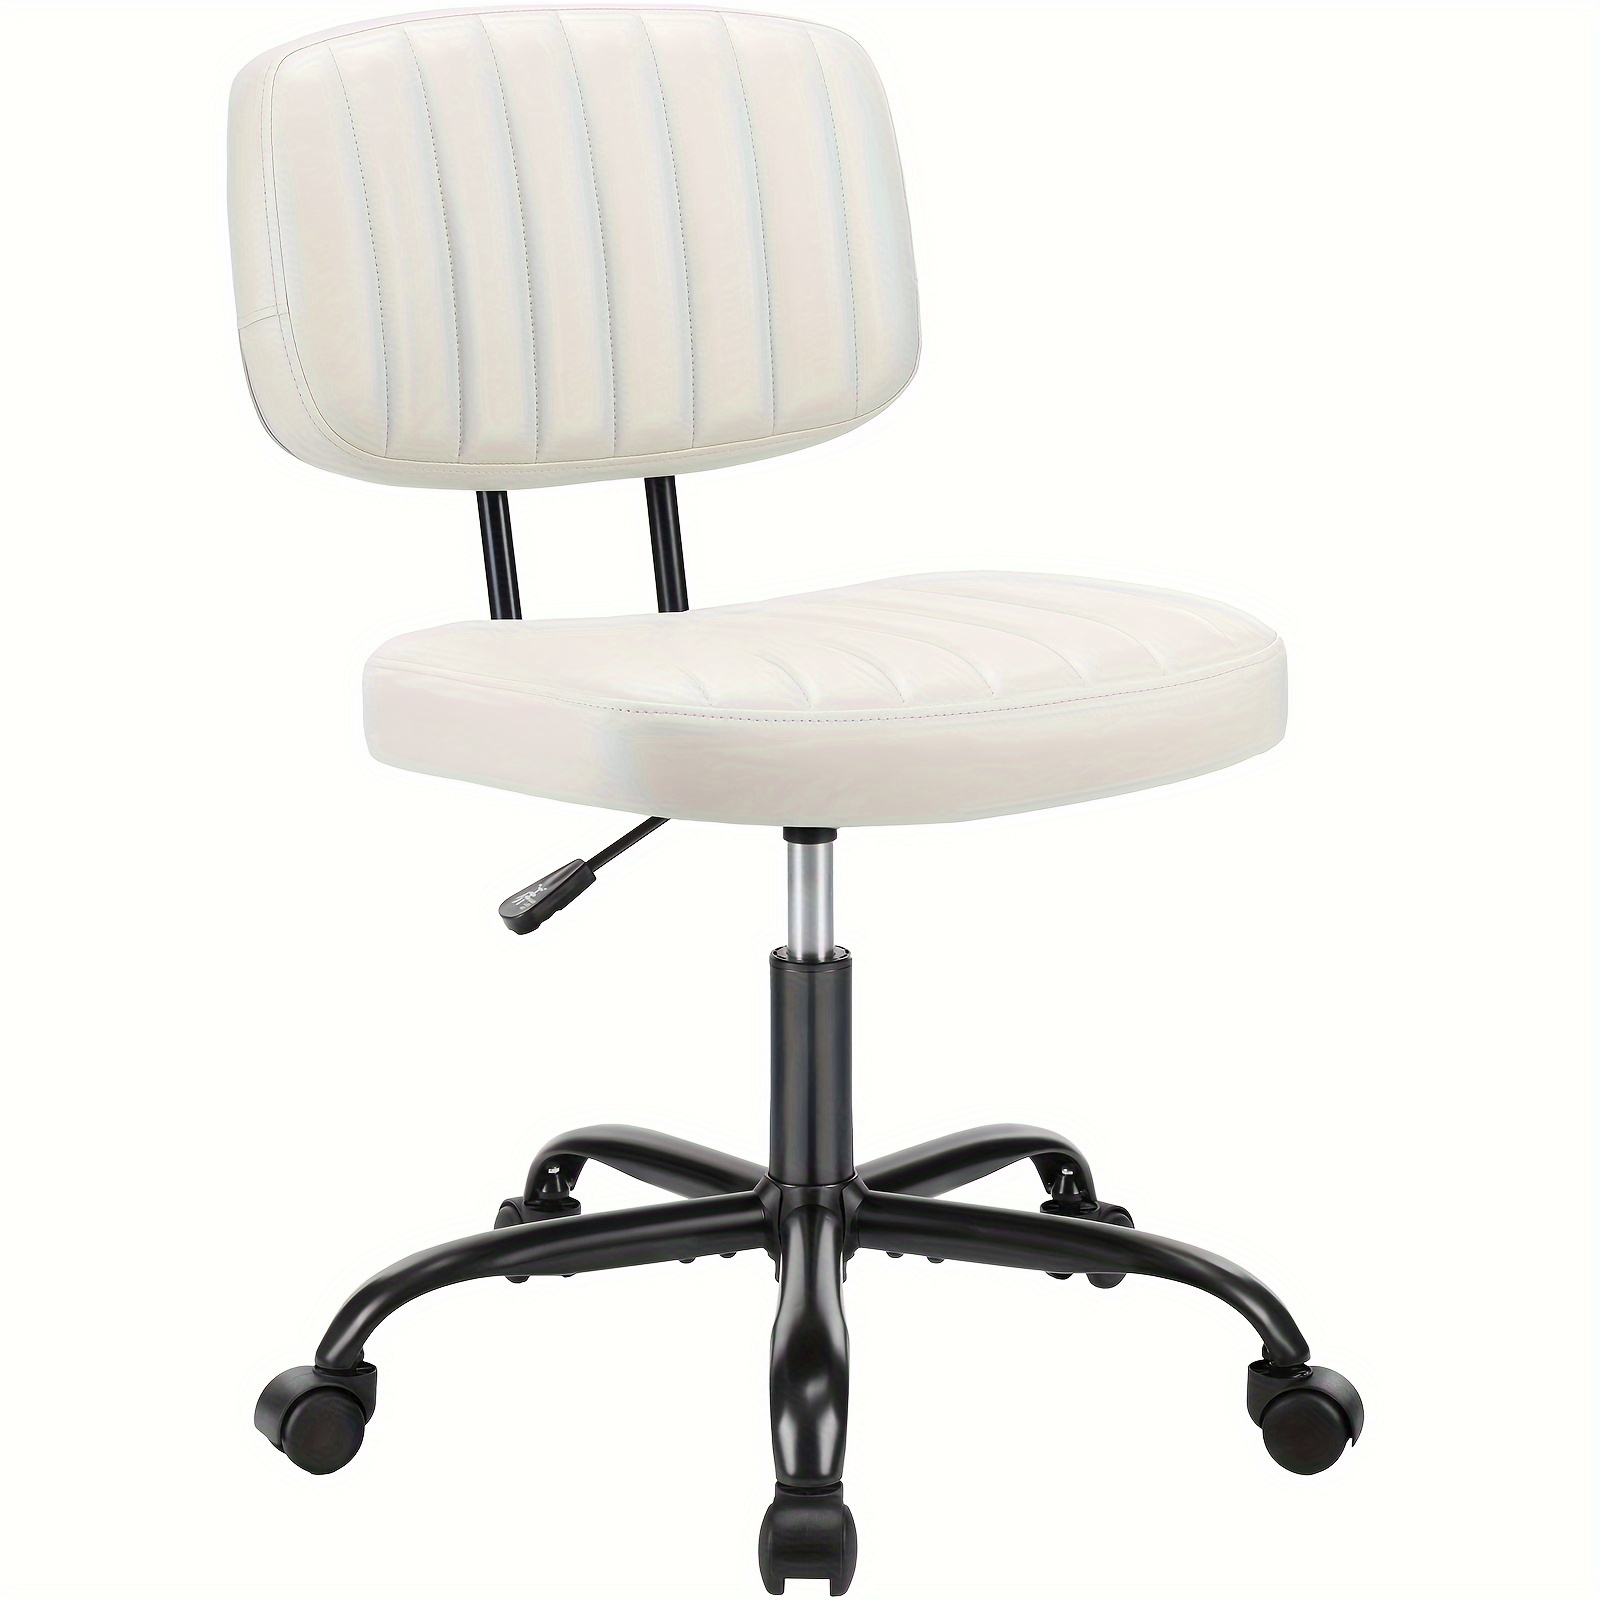 

Small Office Desk Chairs, Pu Leather Armless Low Back Computer Task Vanity Chair, Modern Adjustable Swivel Rolling Chair